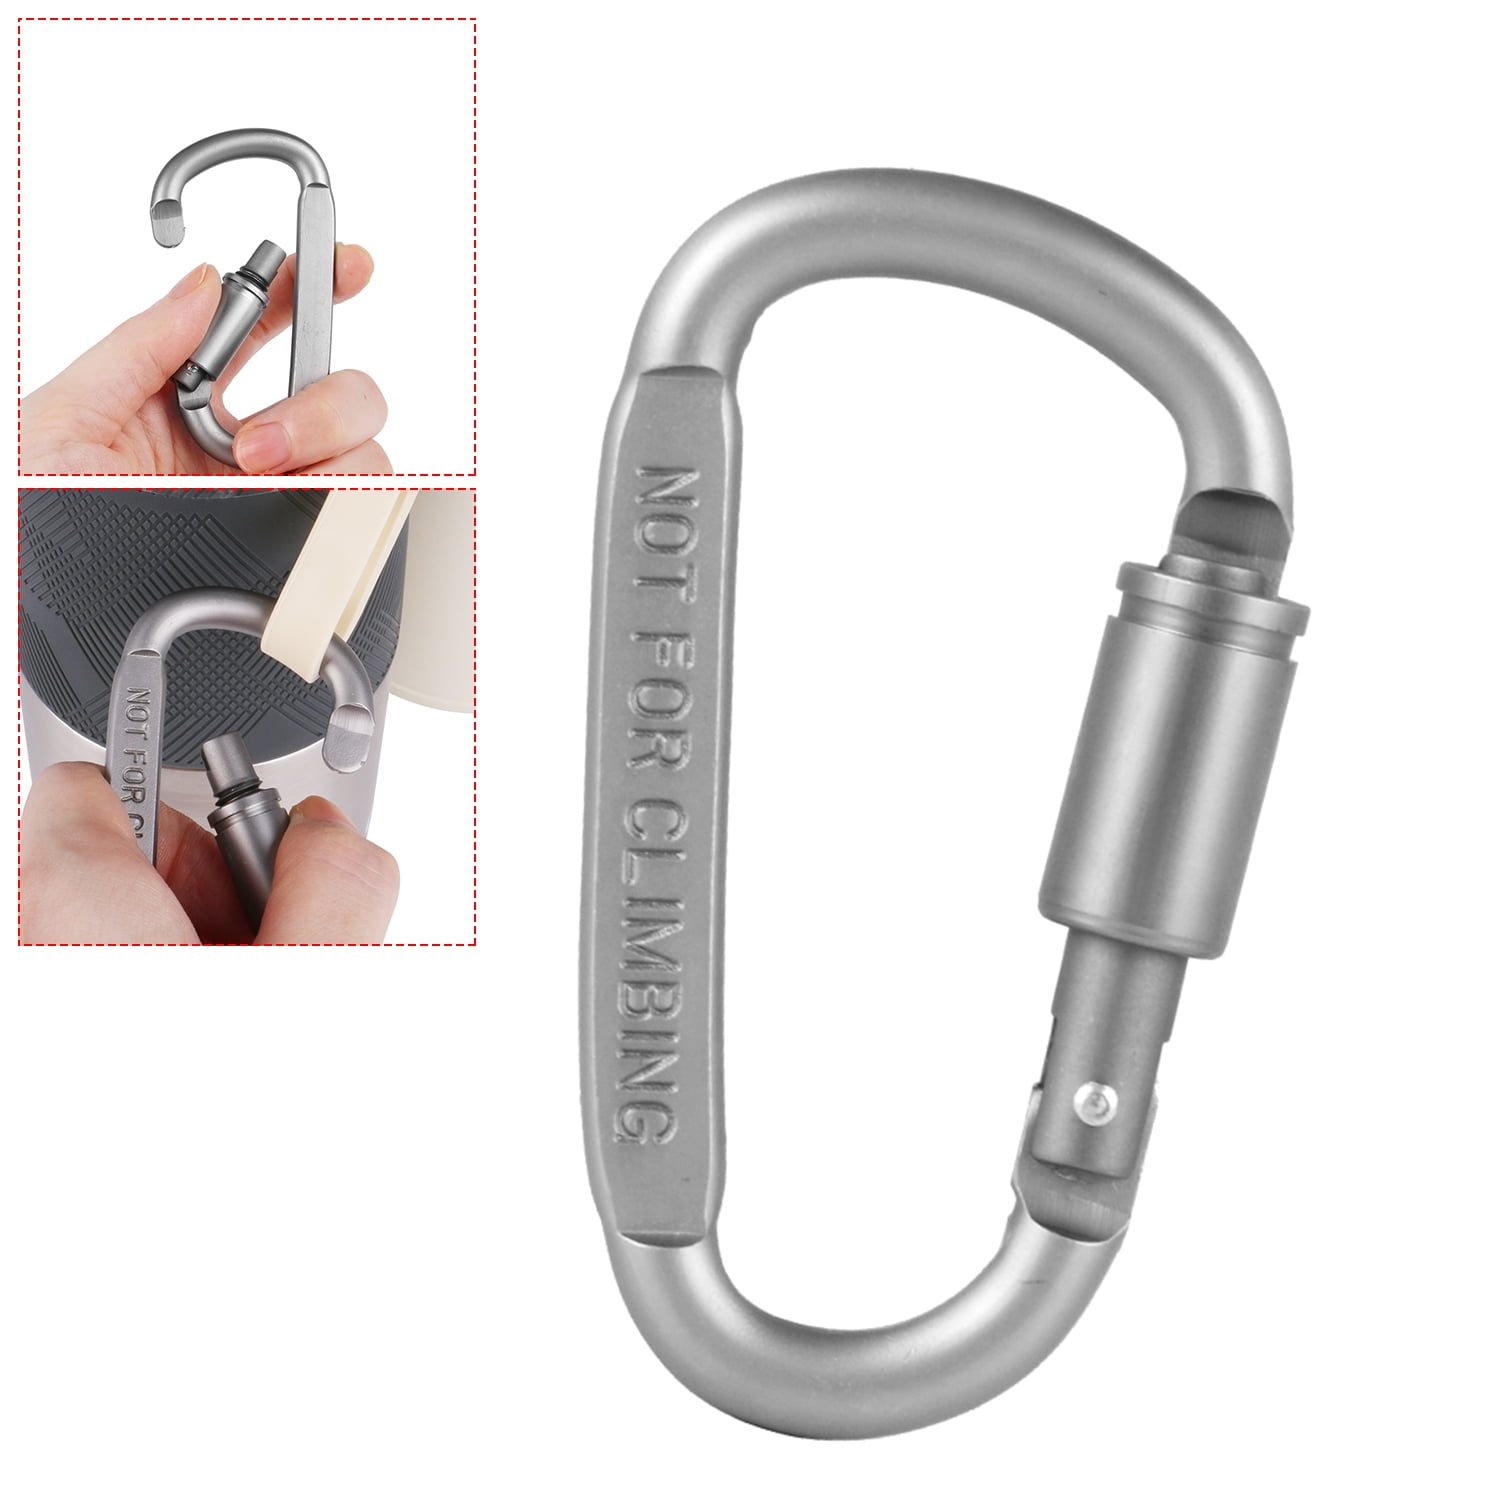 Equipment Alloy Carabiner Climbing Buckles Camping Hiking Hook Buckle Keychain 